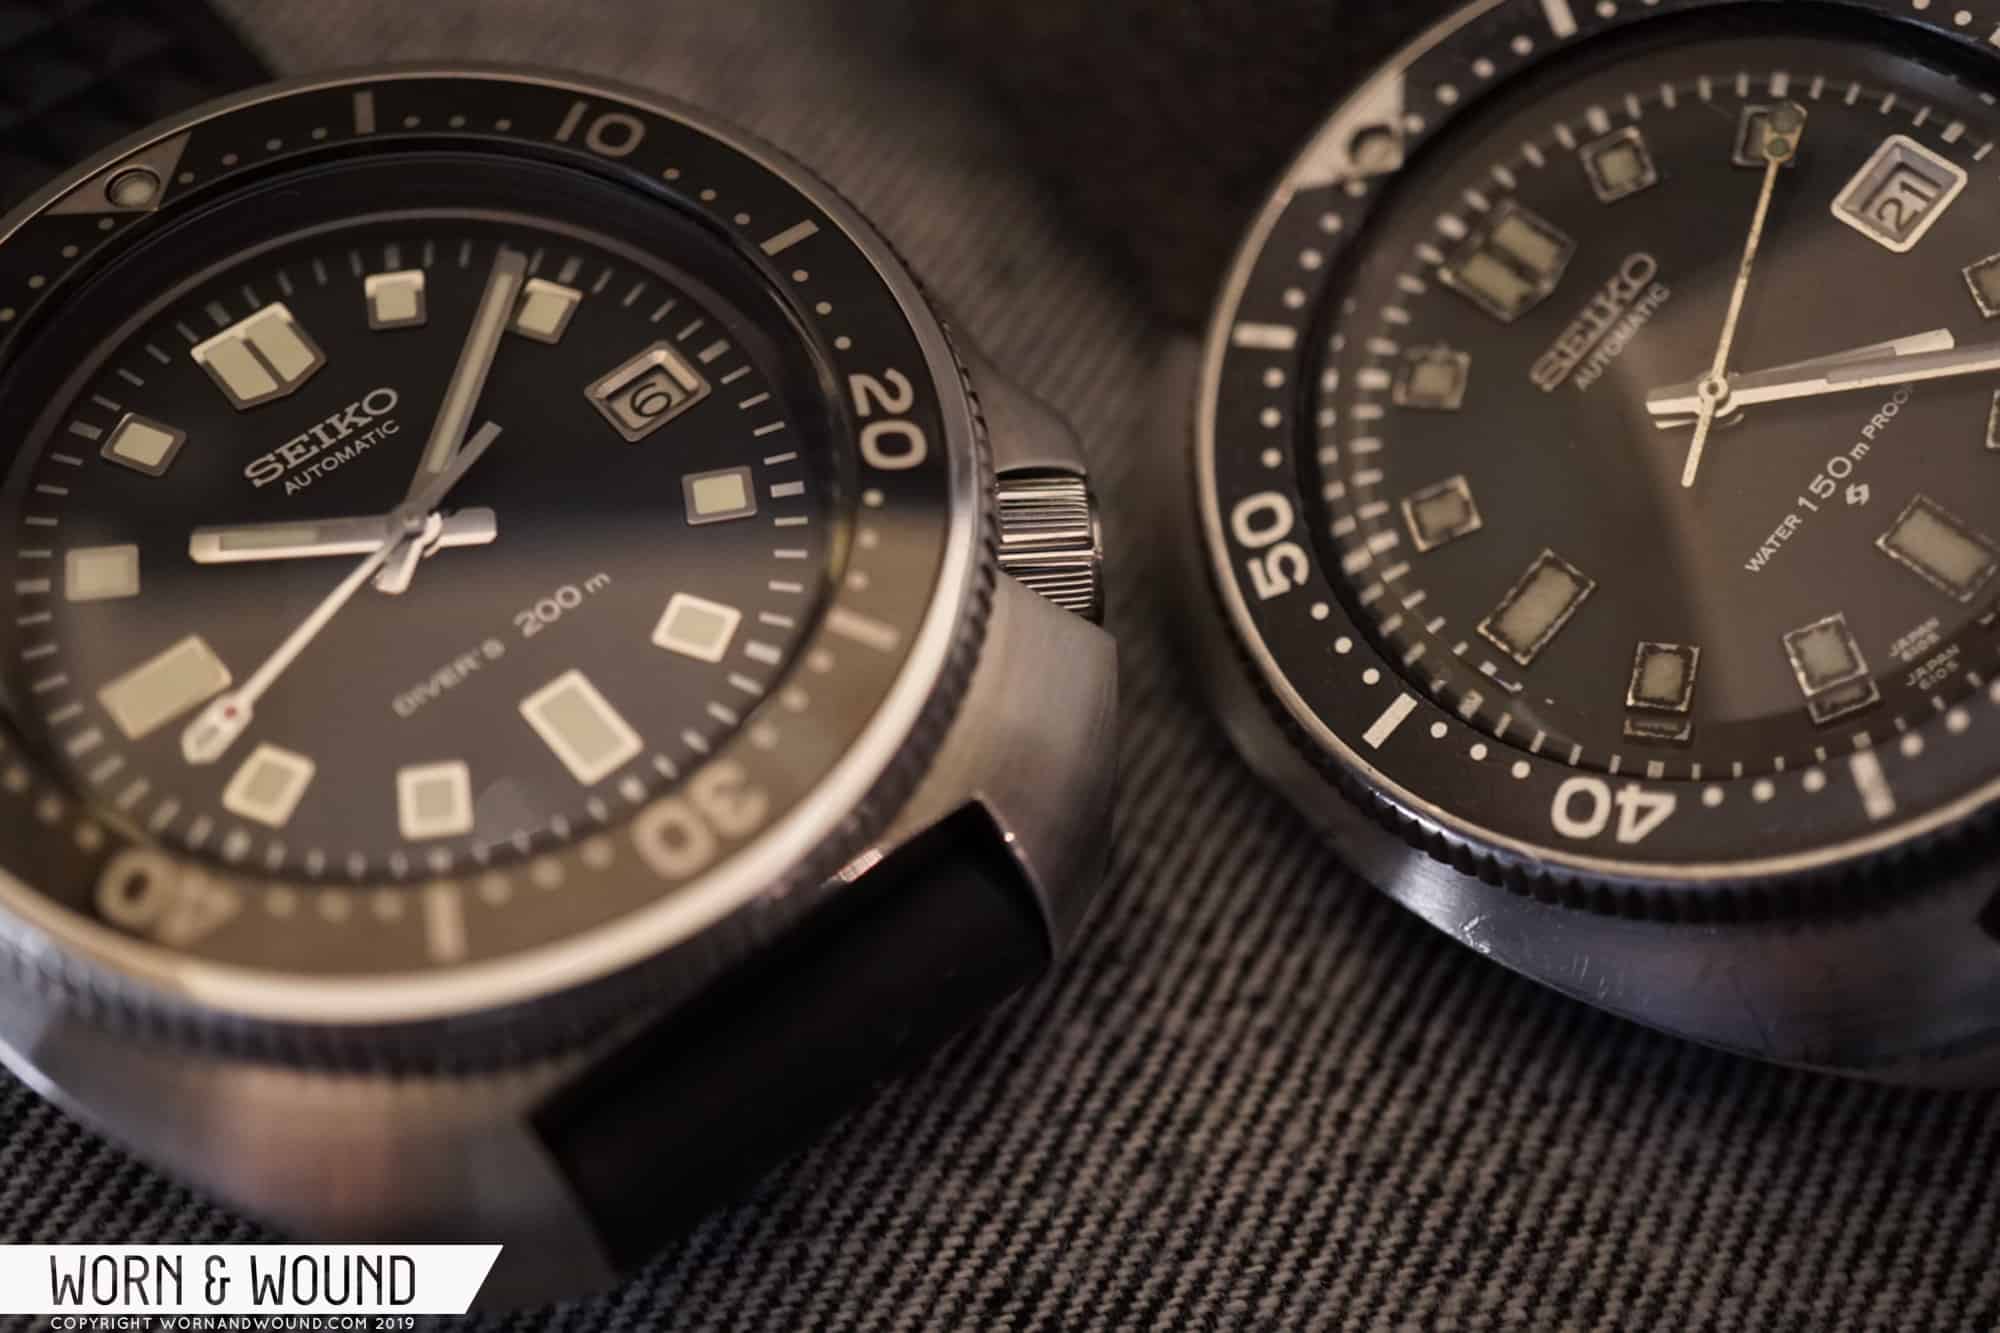 The Worn & Wound Podcast Ep. 89: Baselworld 2019 – Day 1 With Tudor, Oris, Seiko, and More